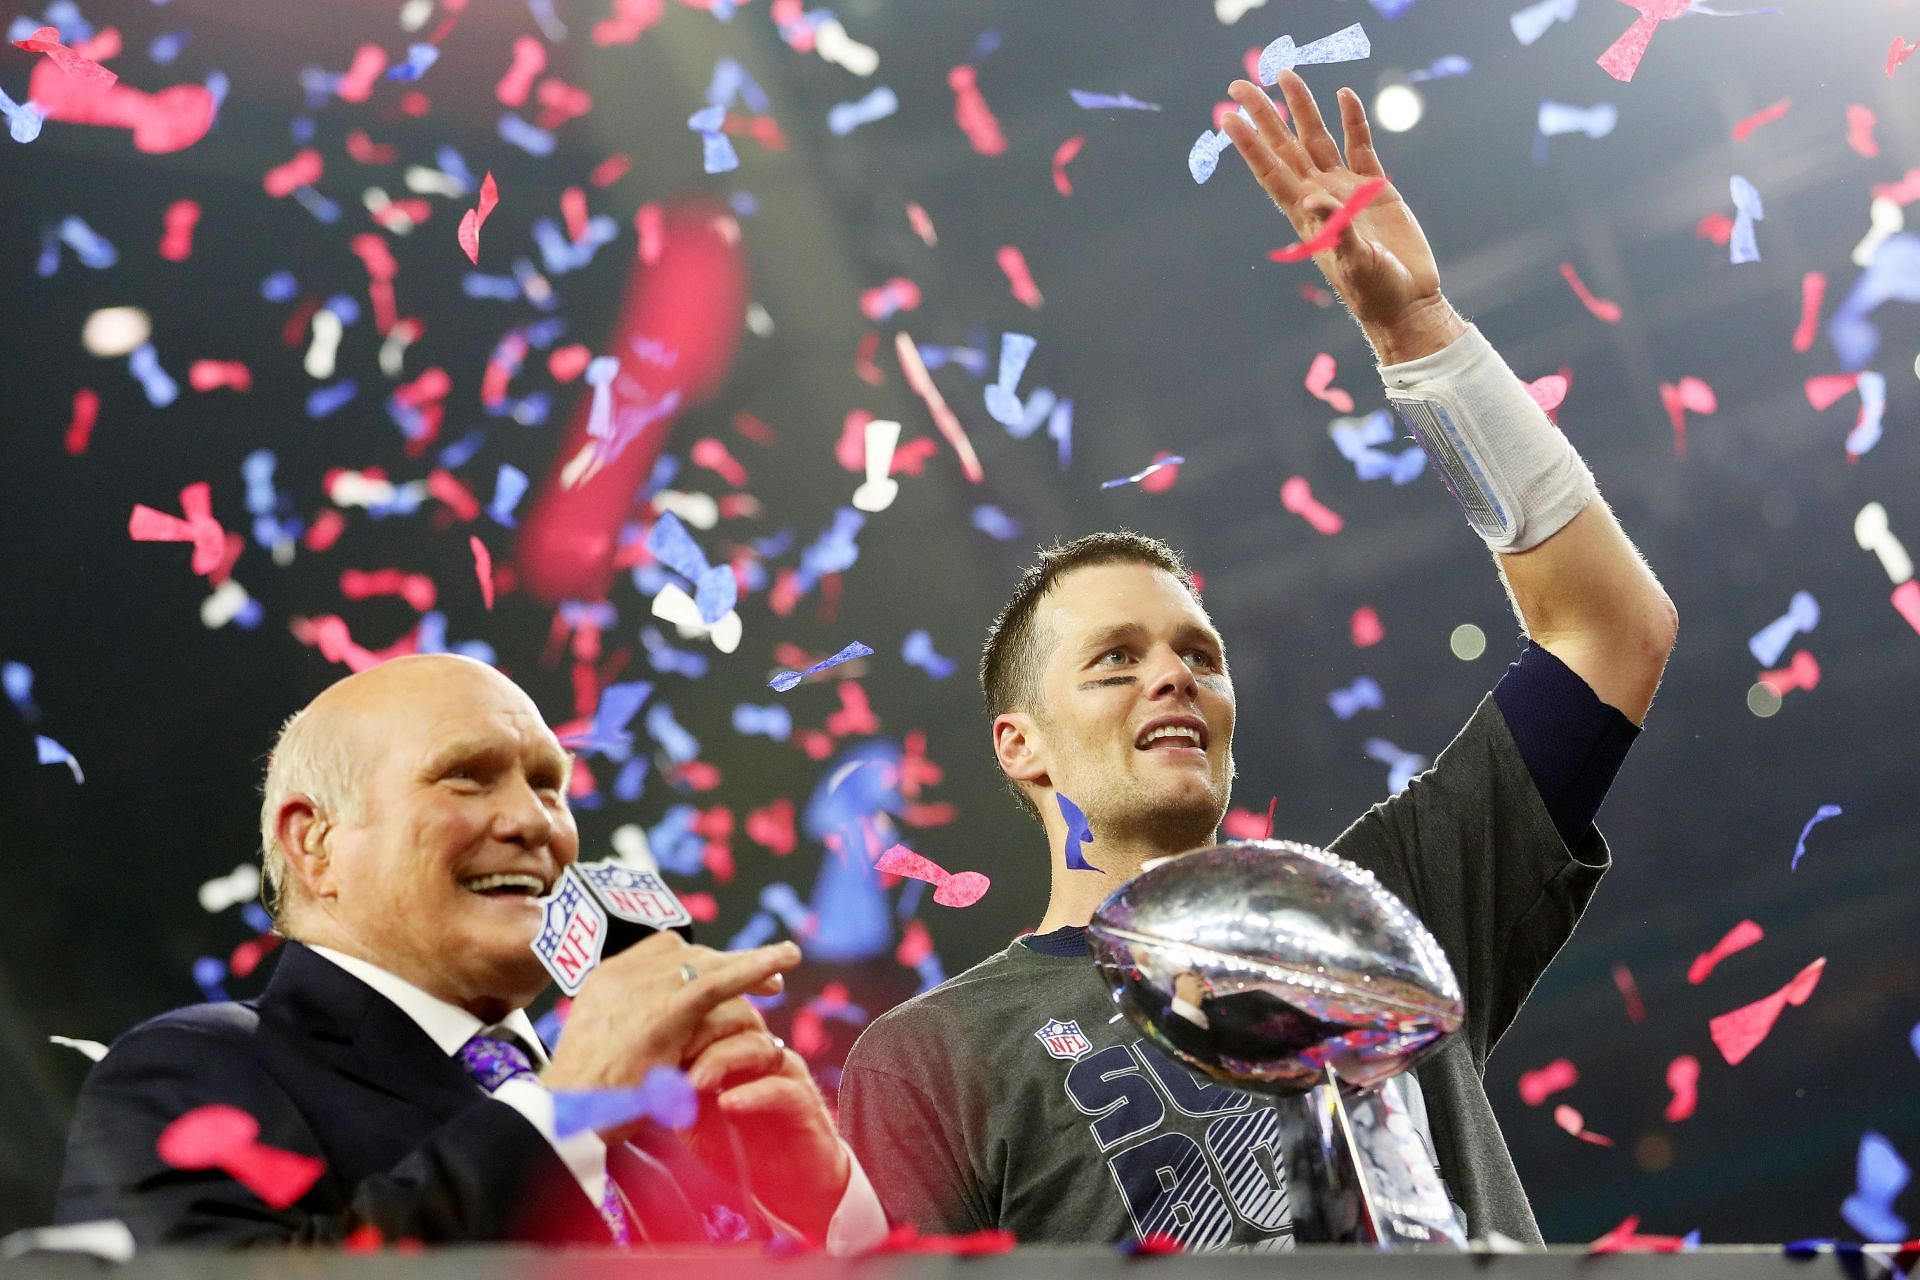 Tom Brady is the most successful NFL player ever